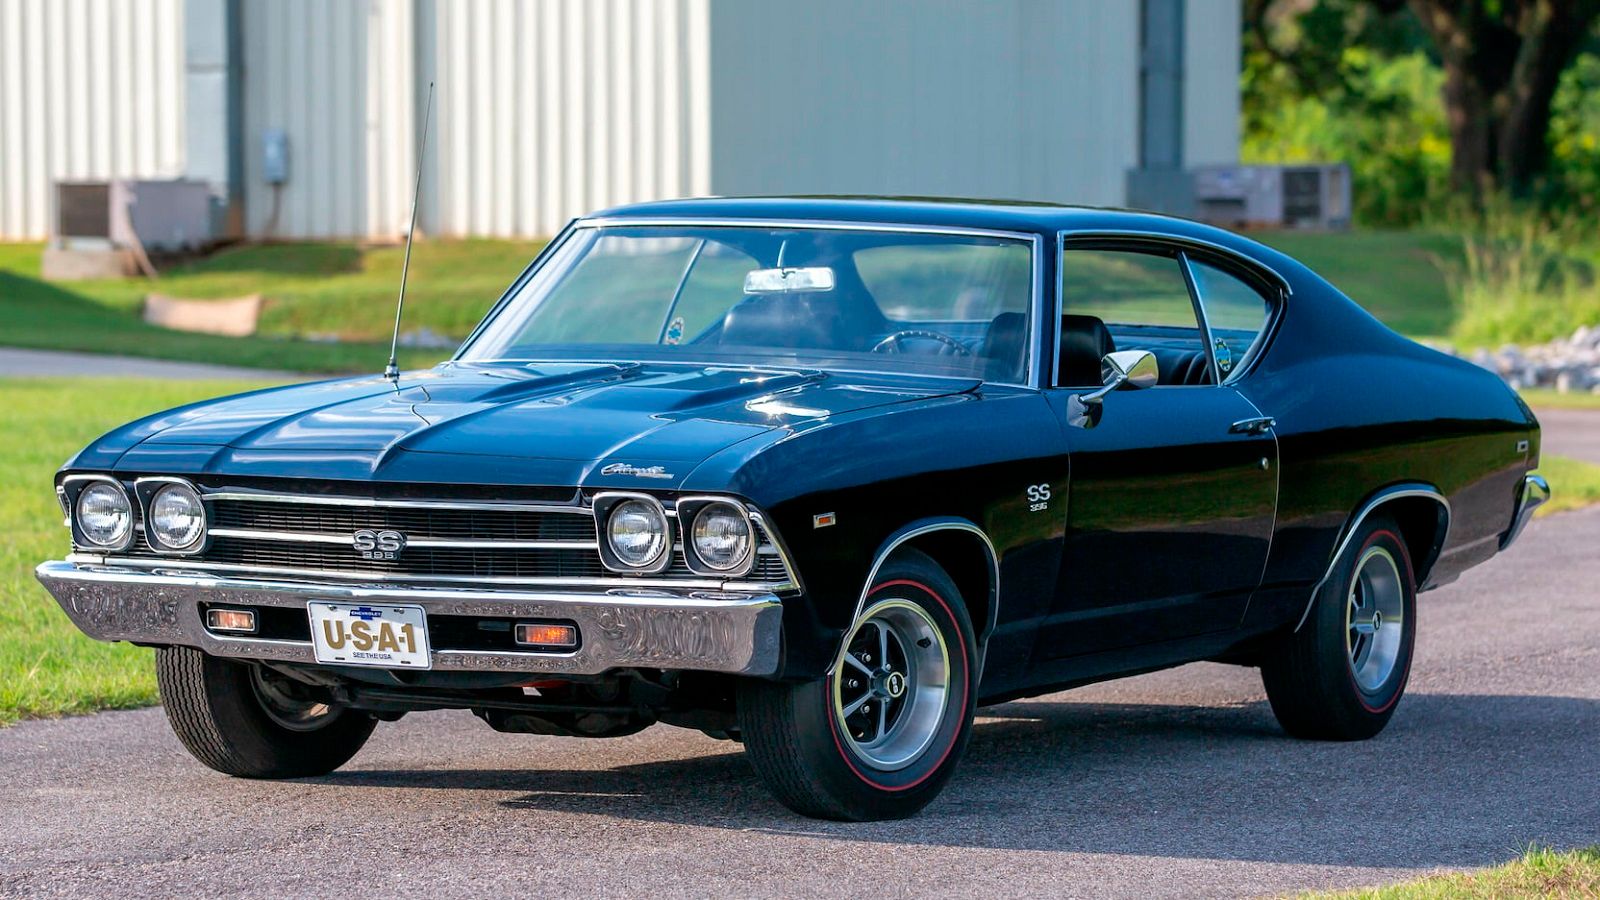 Chevy Chevelle SS 1969 yang diparkir